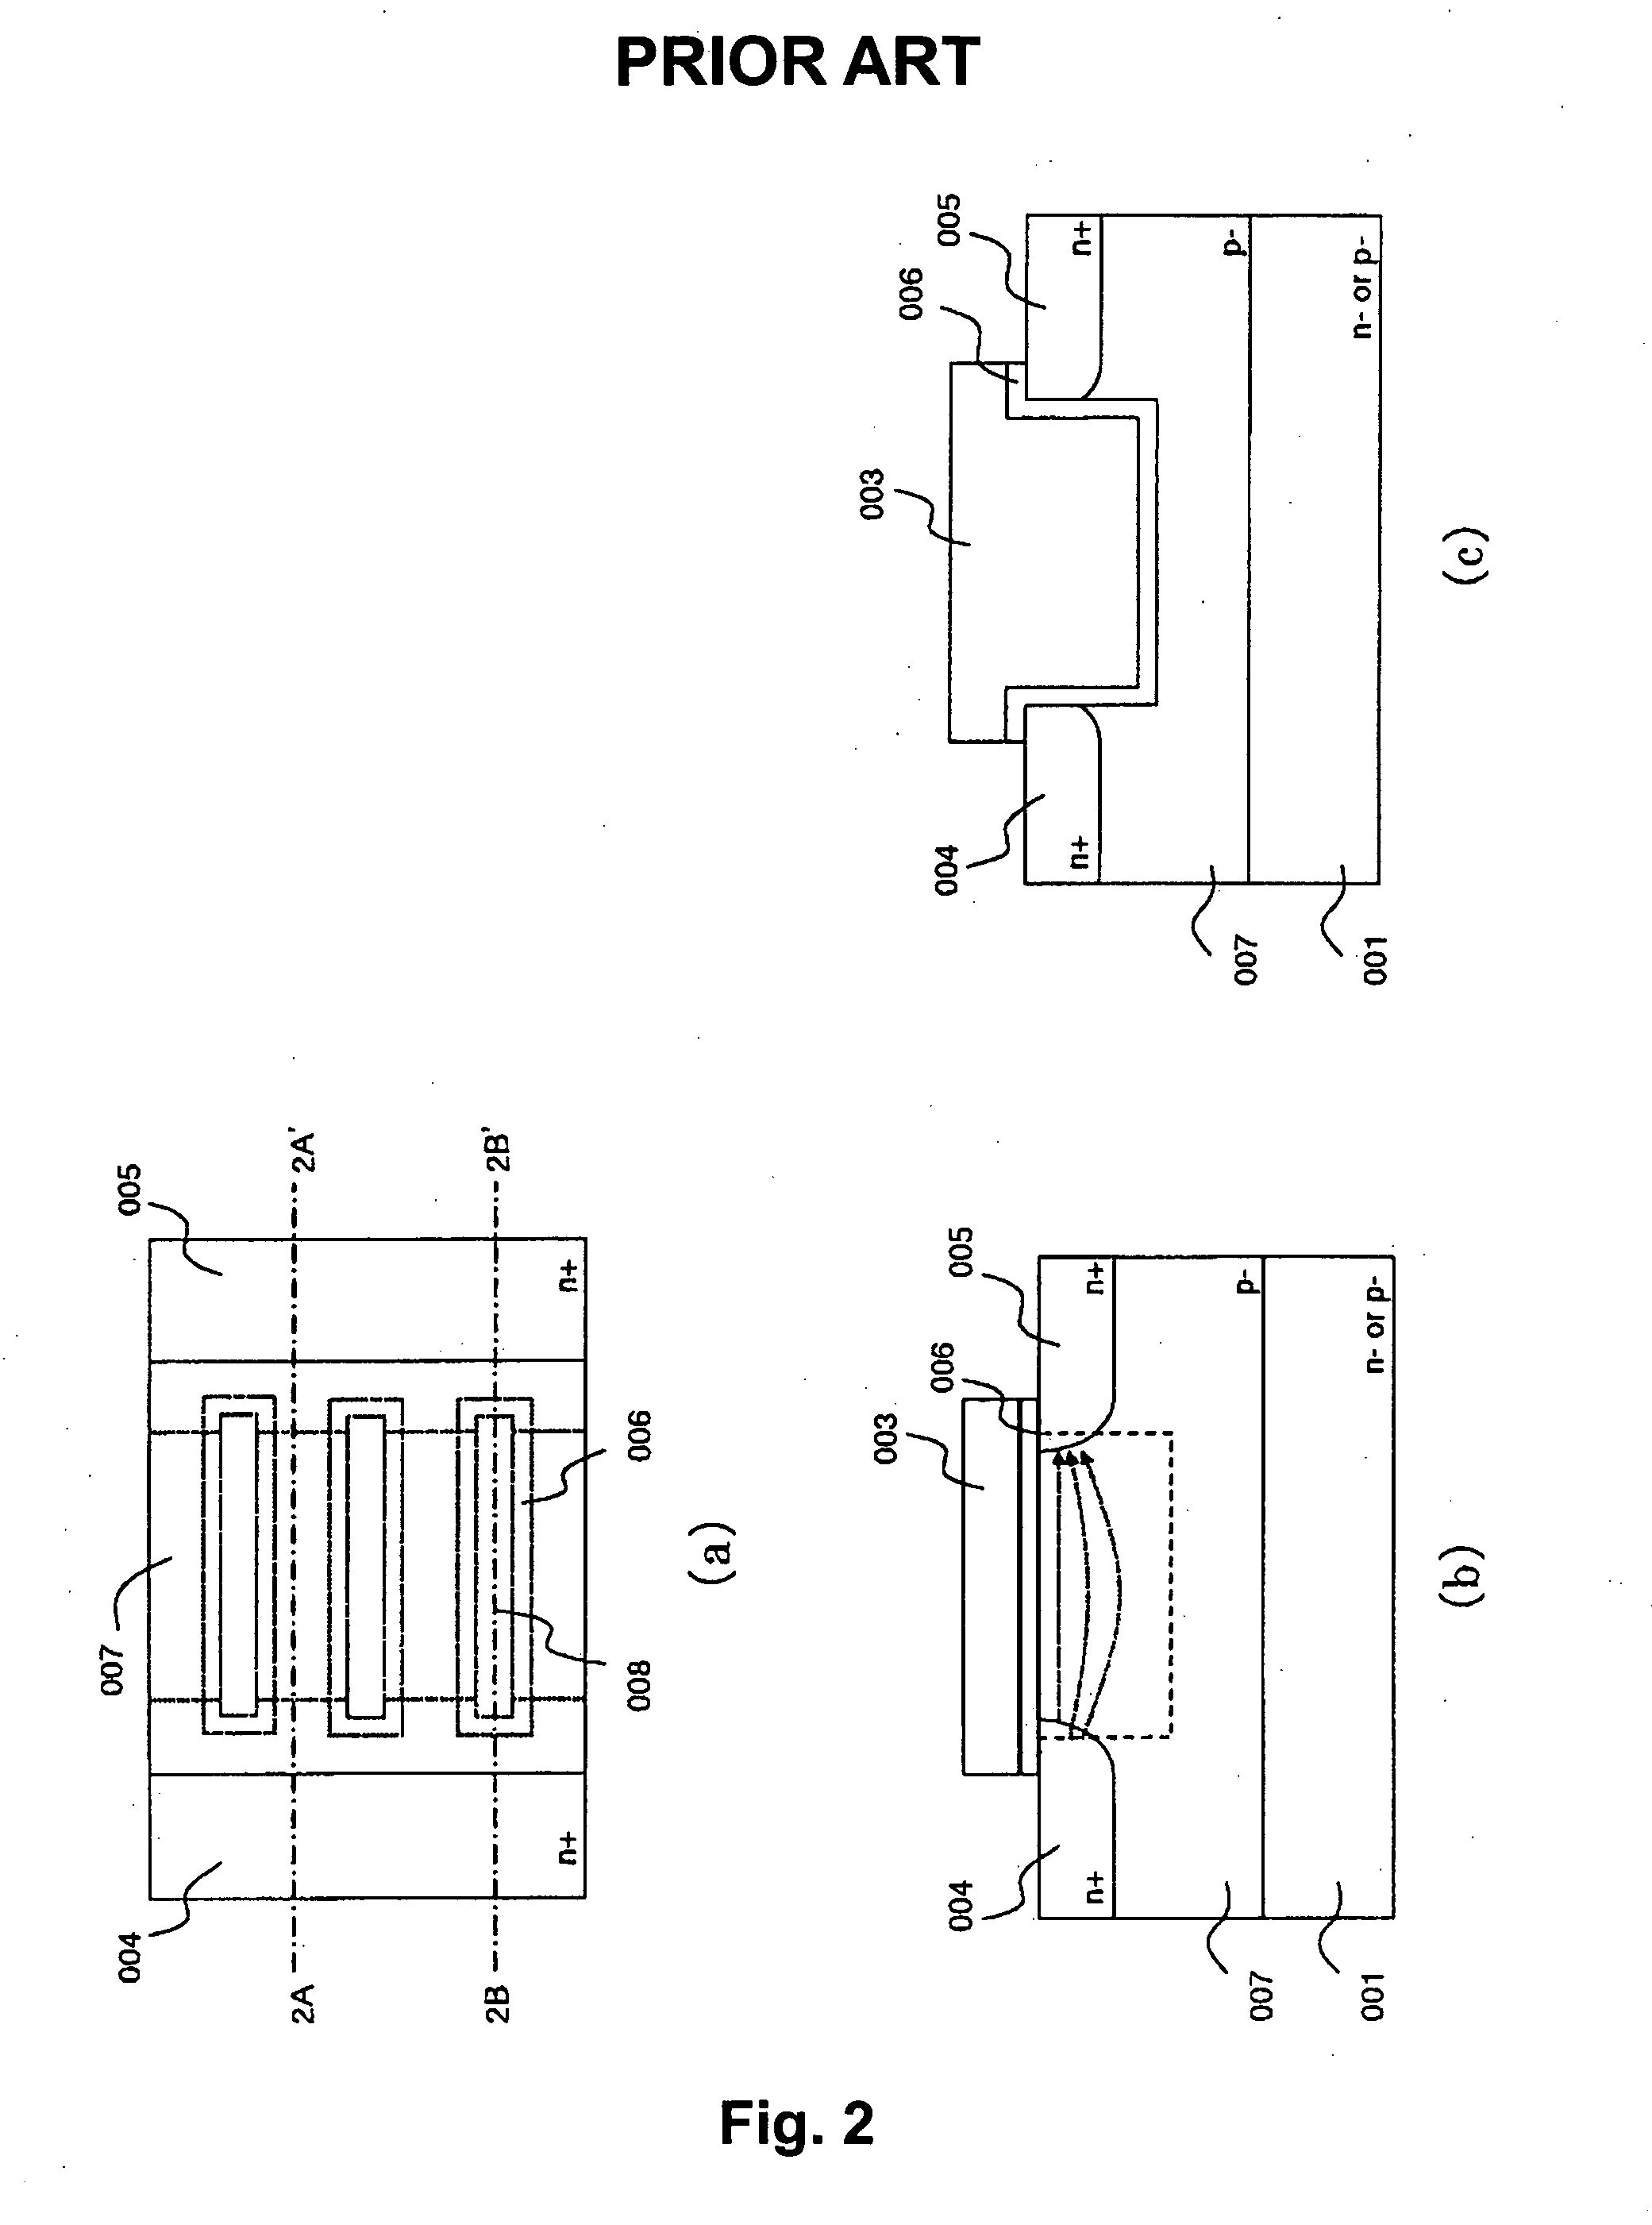 Lateral trench MOSFET